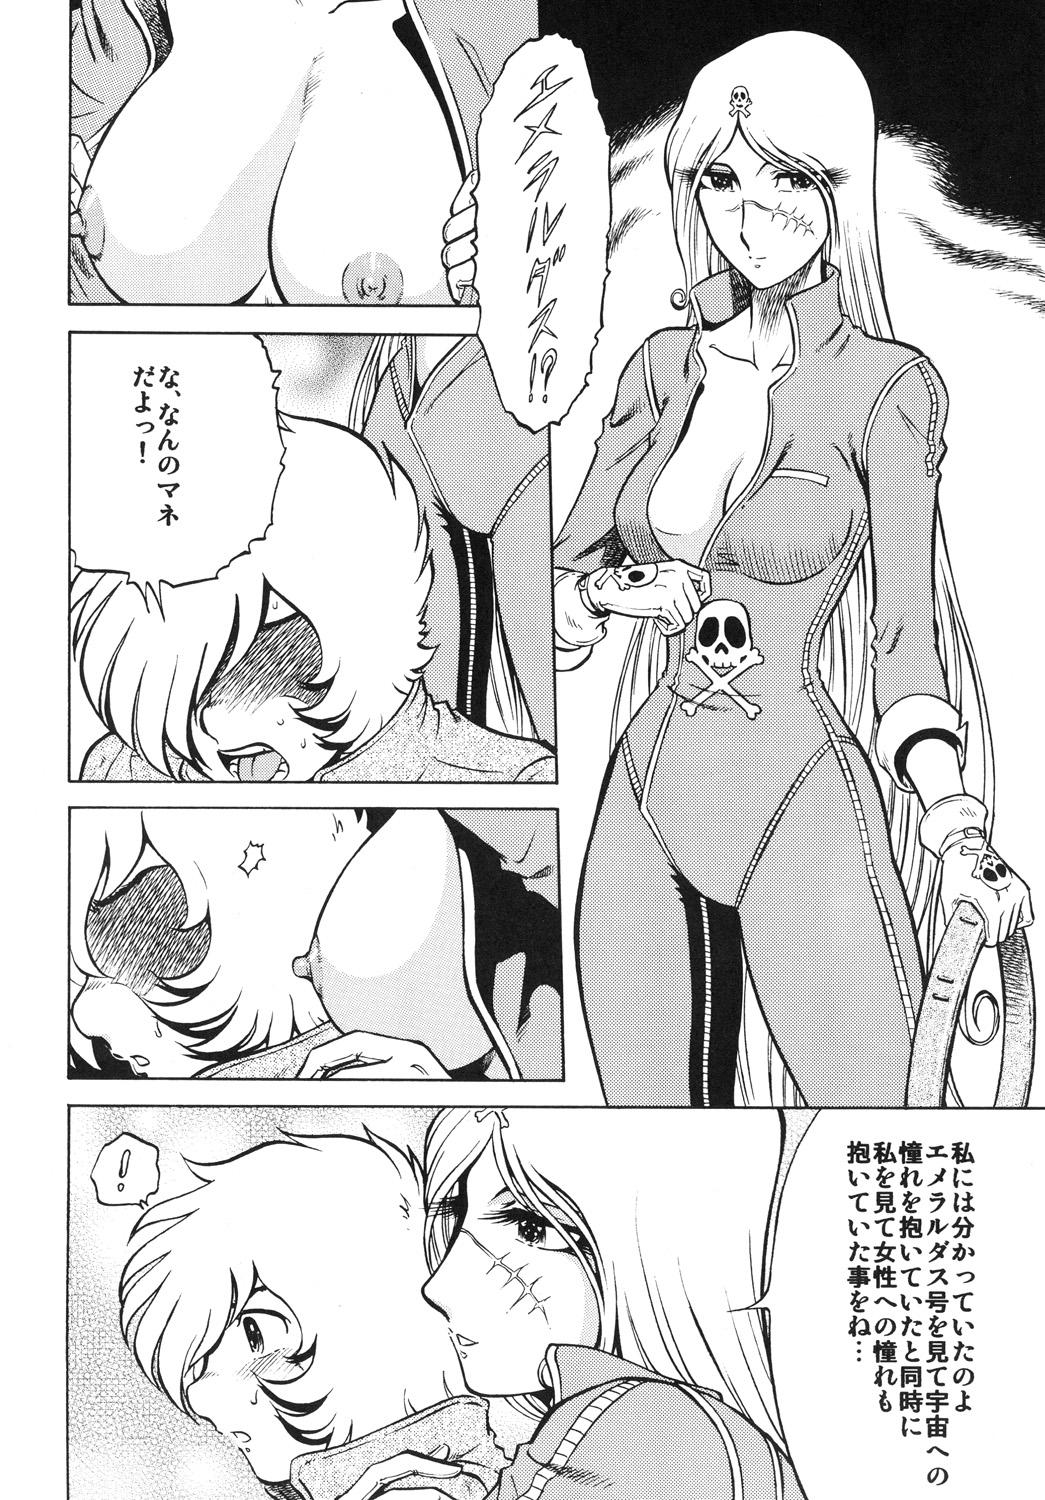 Pussy Fucking NightHead+2 - Space pirate captain harlock Viet - Page 9